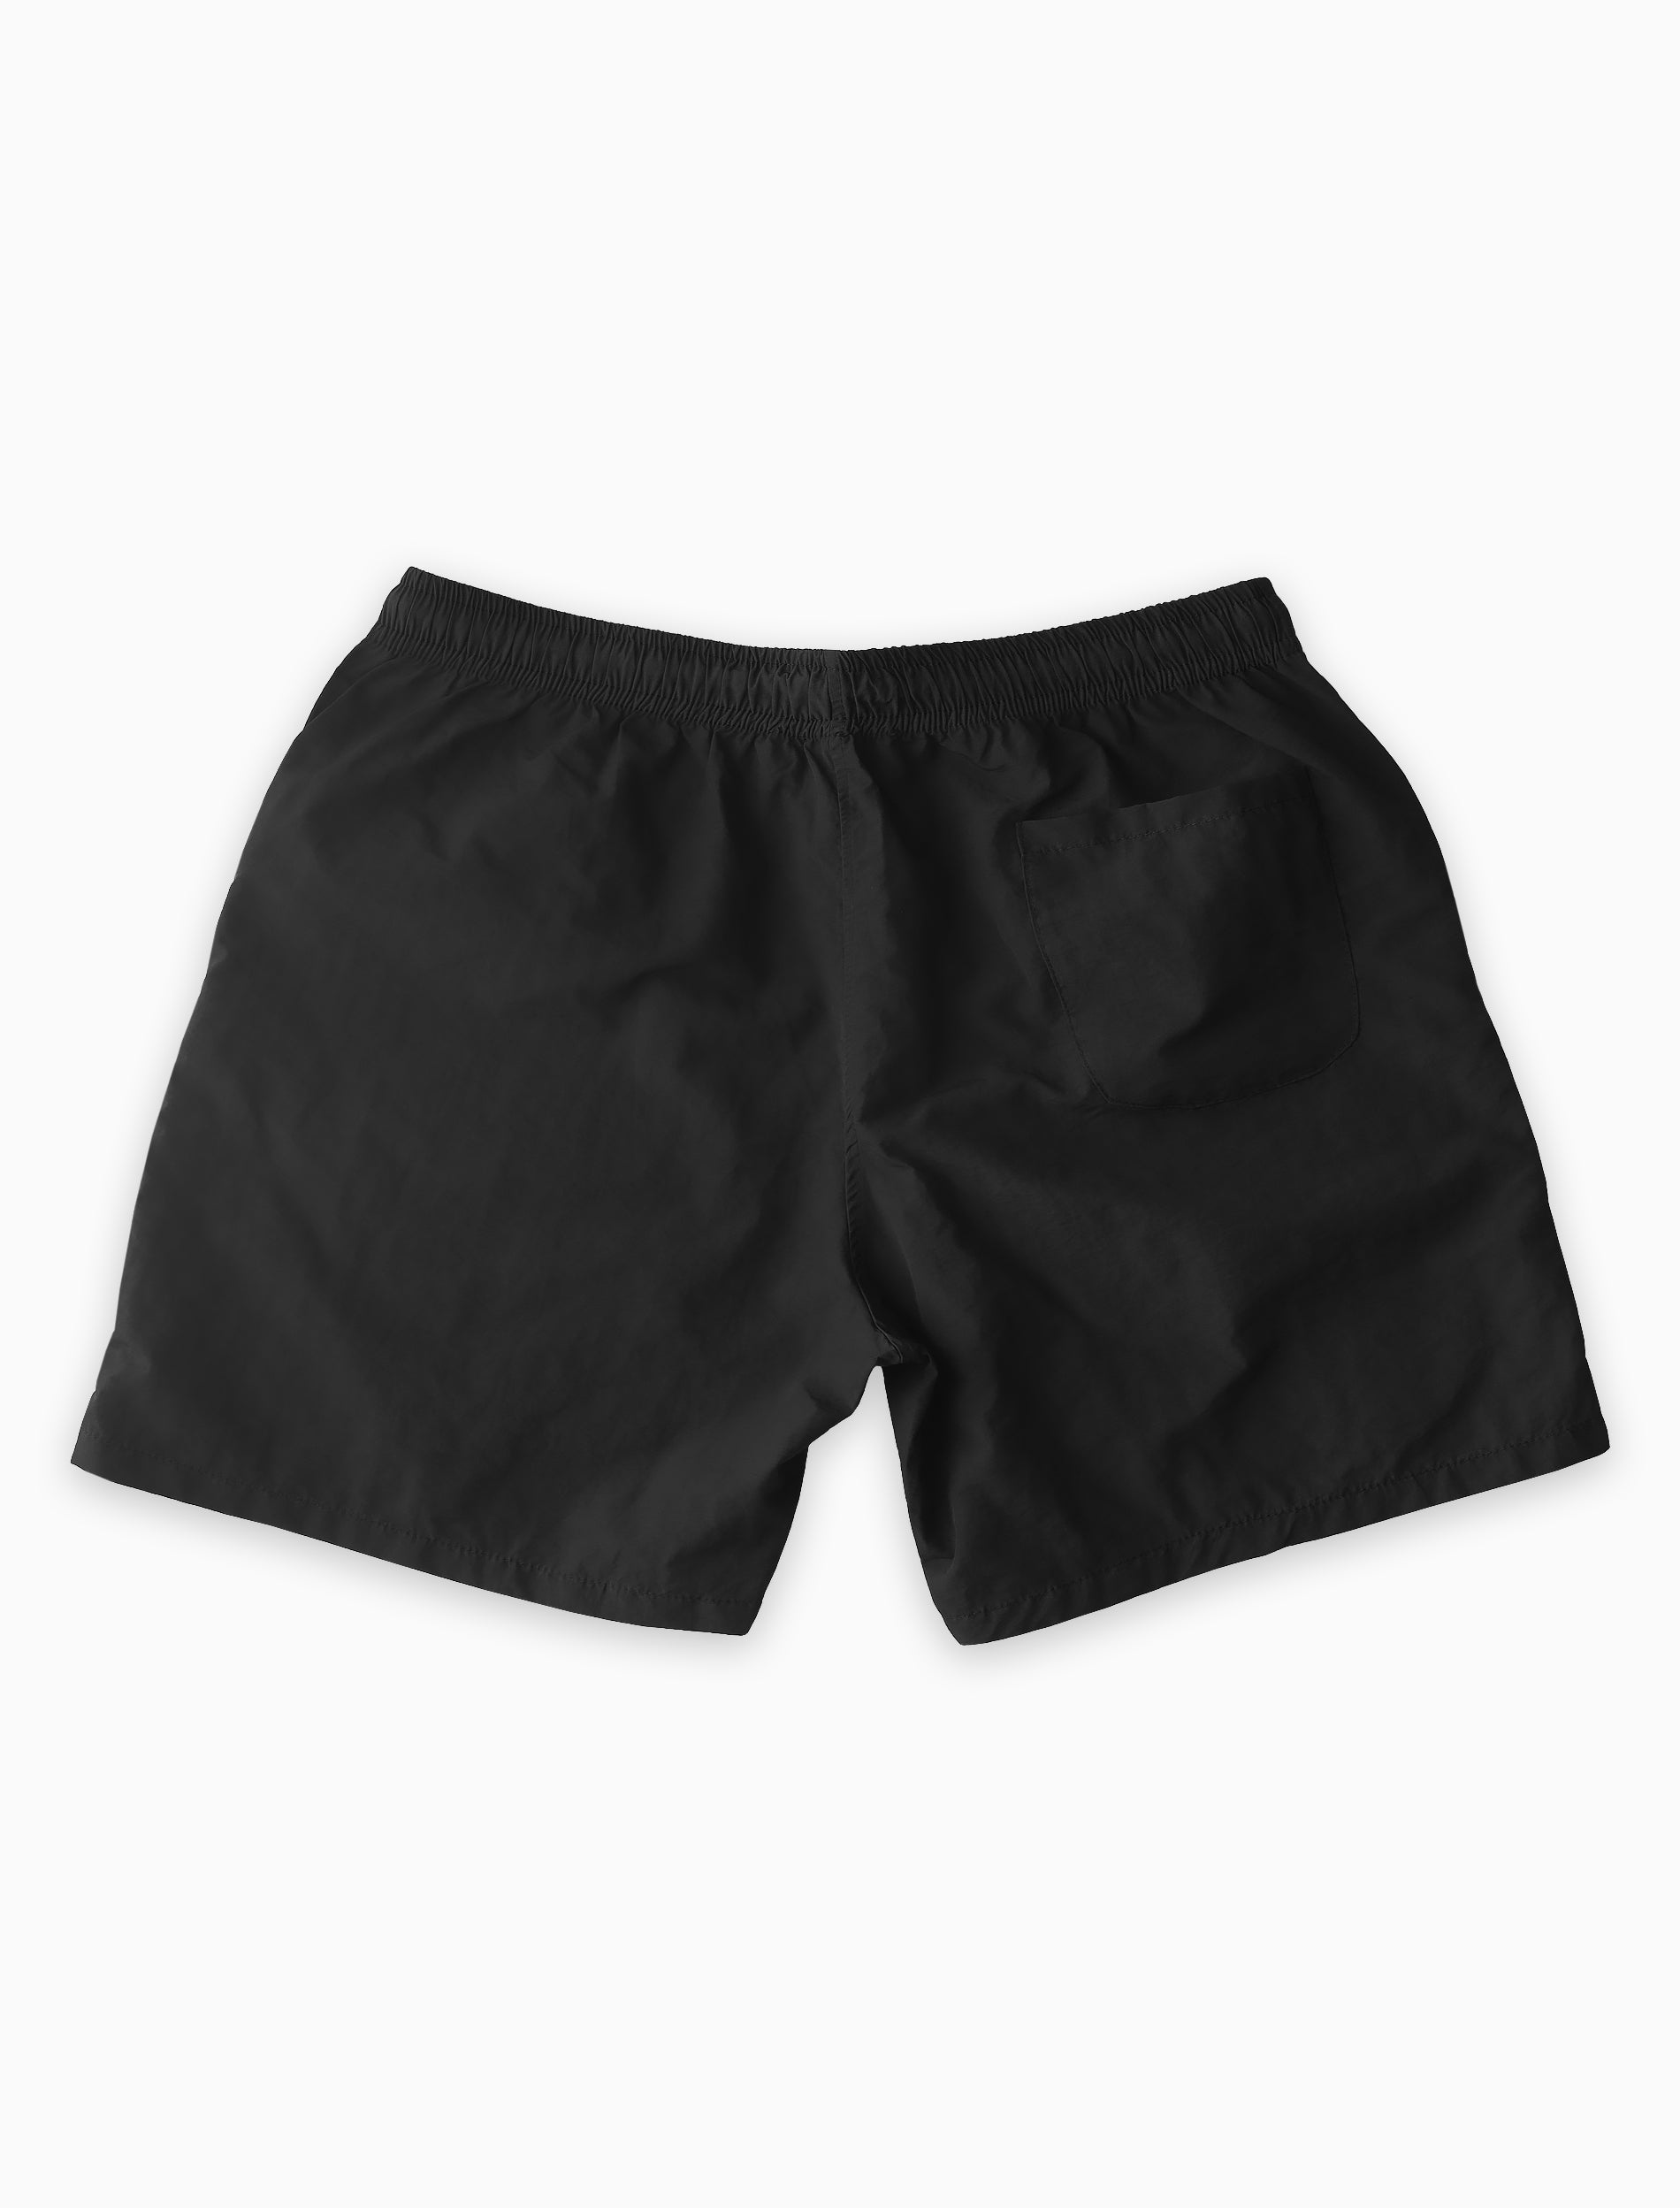 Our Quick Dry Water Shorts are crafted with 100% Nylon with a relaxed fit. Featuring the Acrylick® 3D Rubber Patch, they're made with sustainable woven nylon for a smooth, quick-drying fabric. Elastic waistband with shoestring drawcord, sewn eyelets, side & back pockets. Make them ideal for any activity.